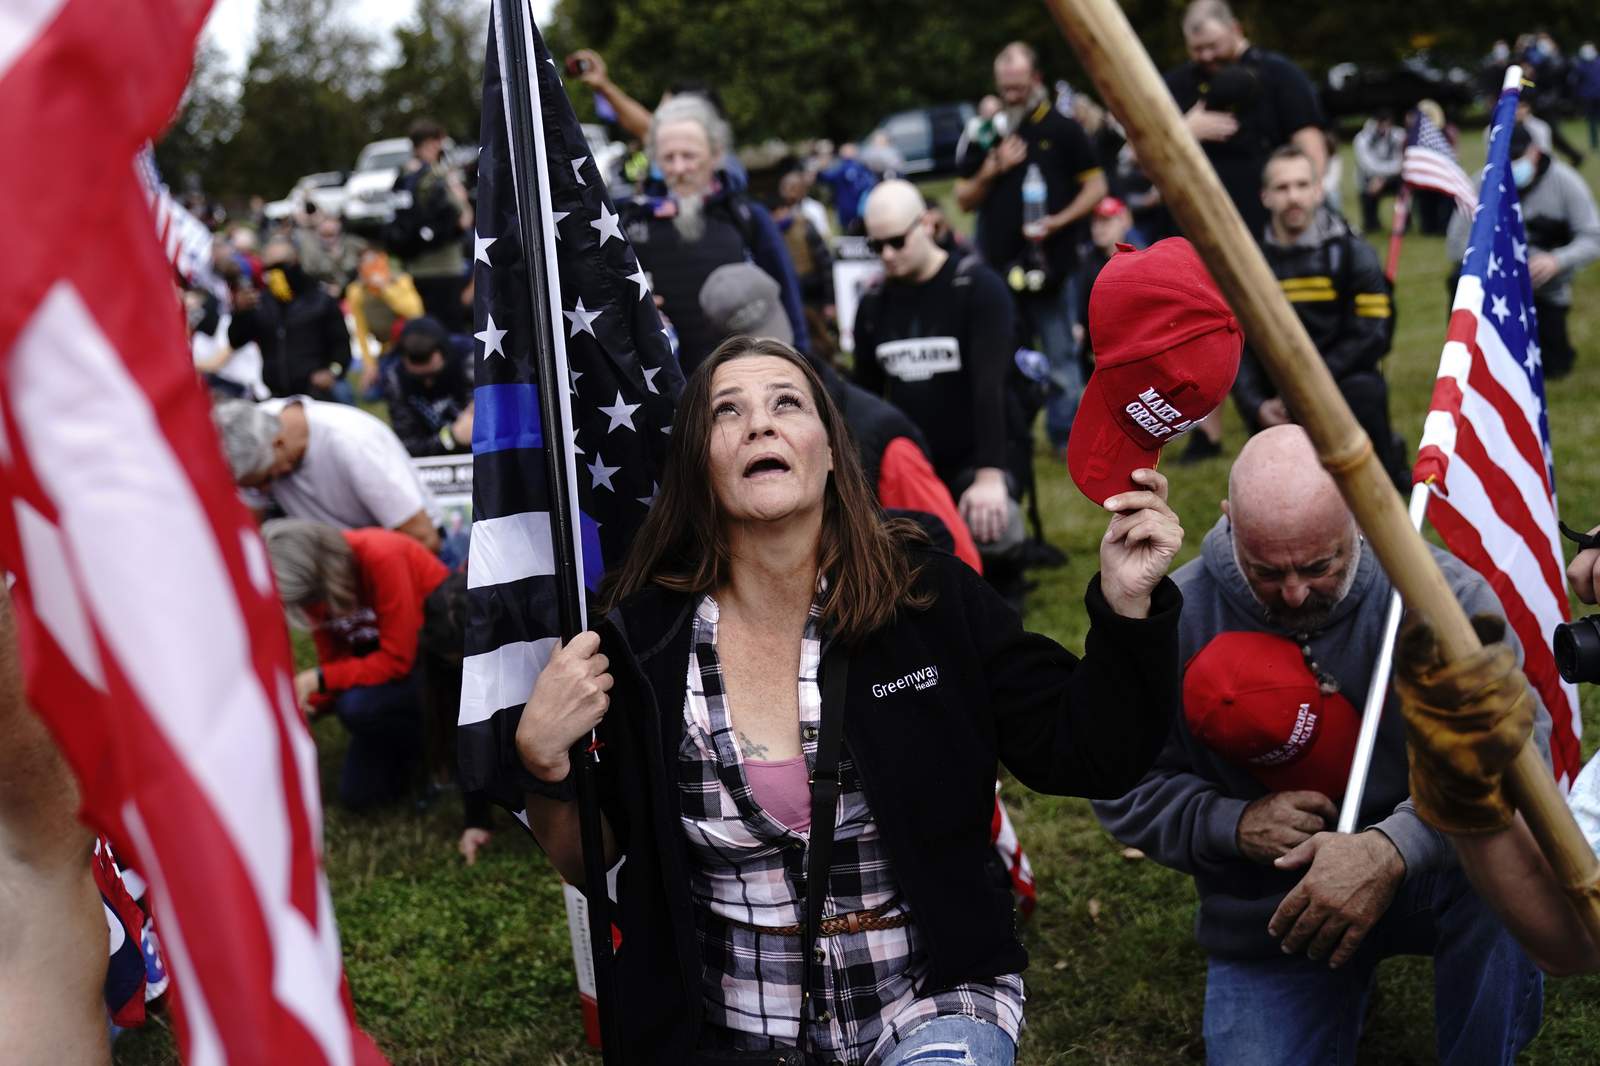 Portland, Oregon, largely peaceful after right-wing rally